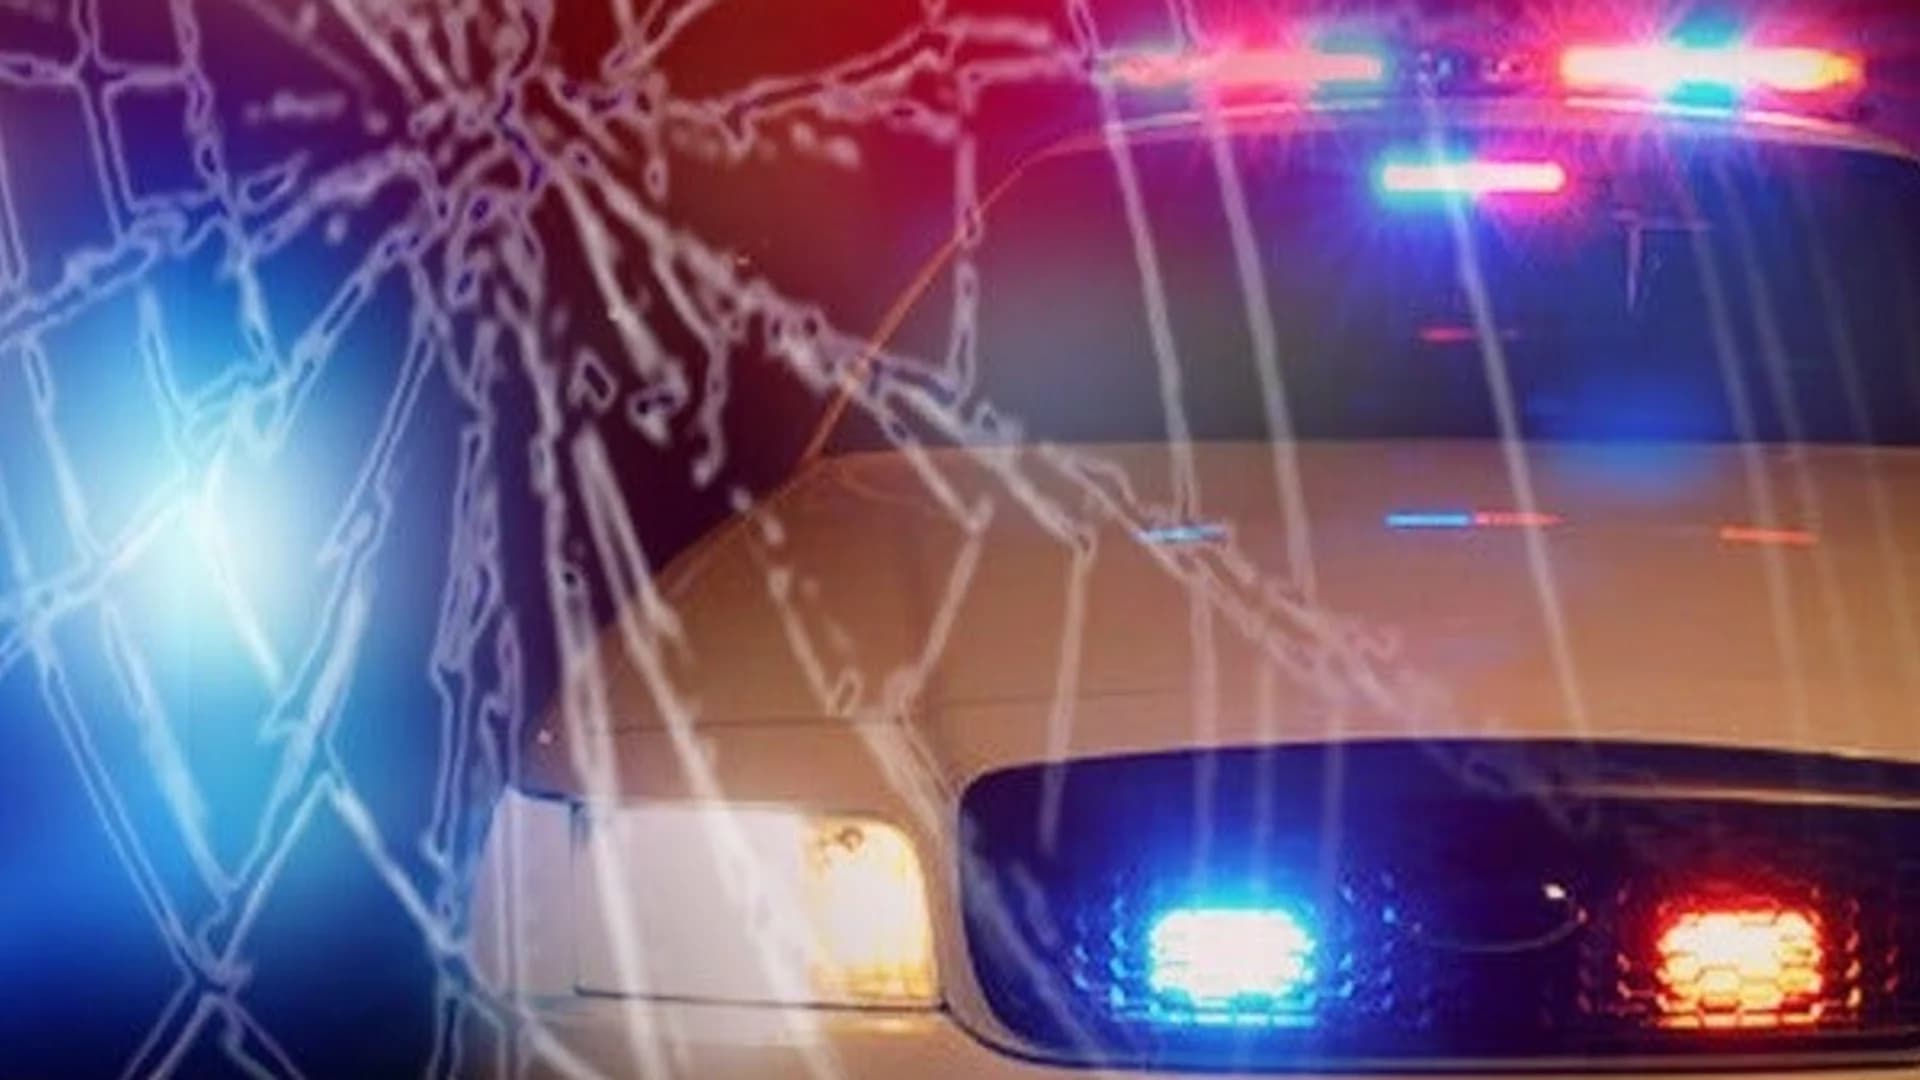 Officials: Woman struck and killed by police cruiser